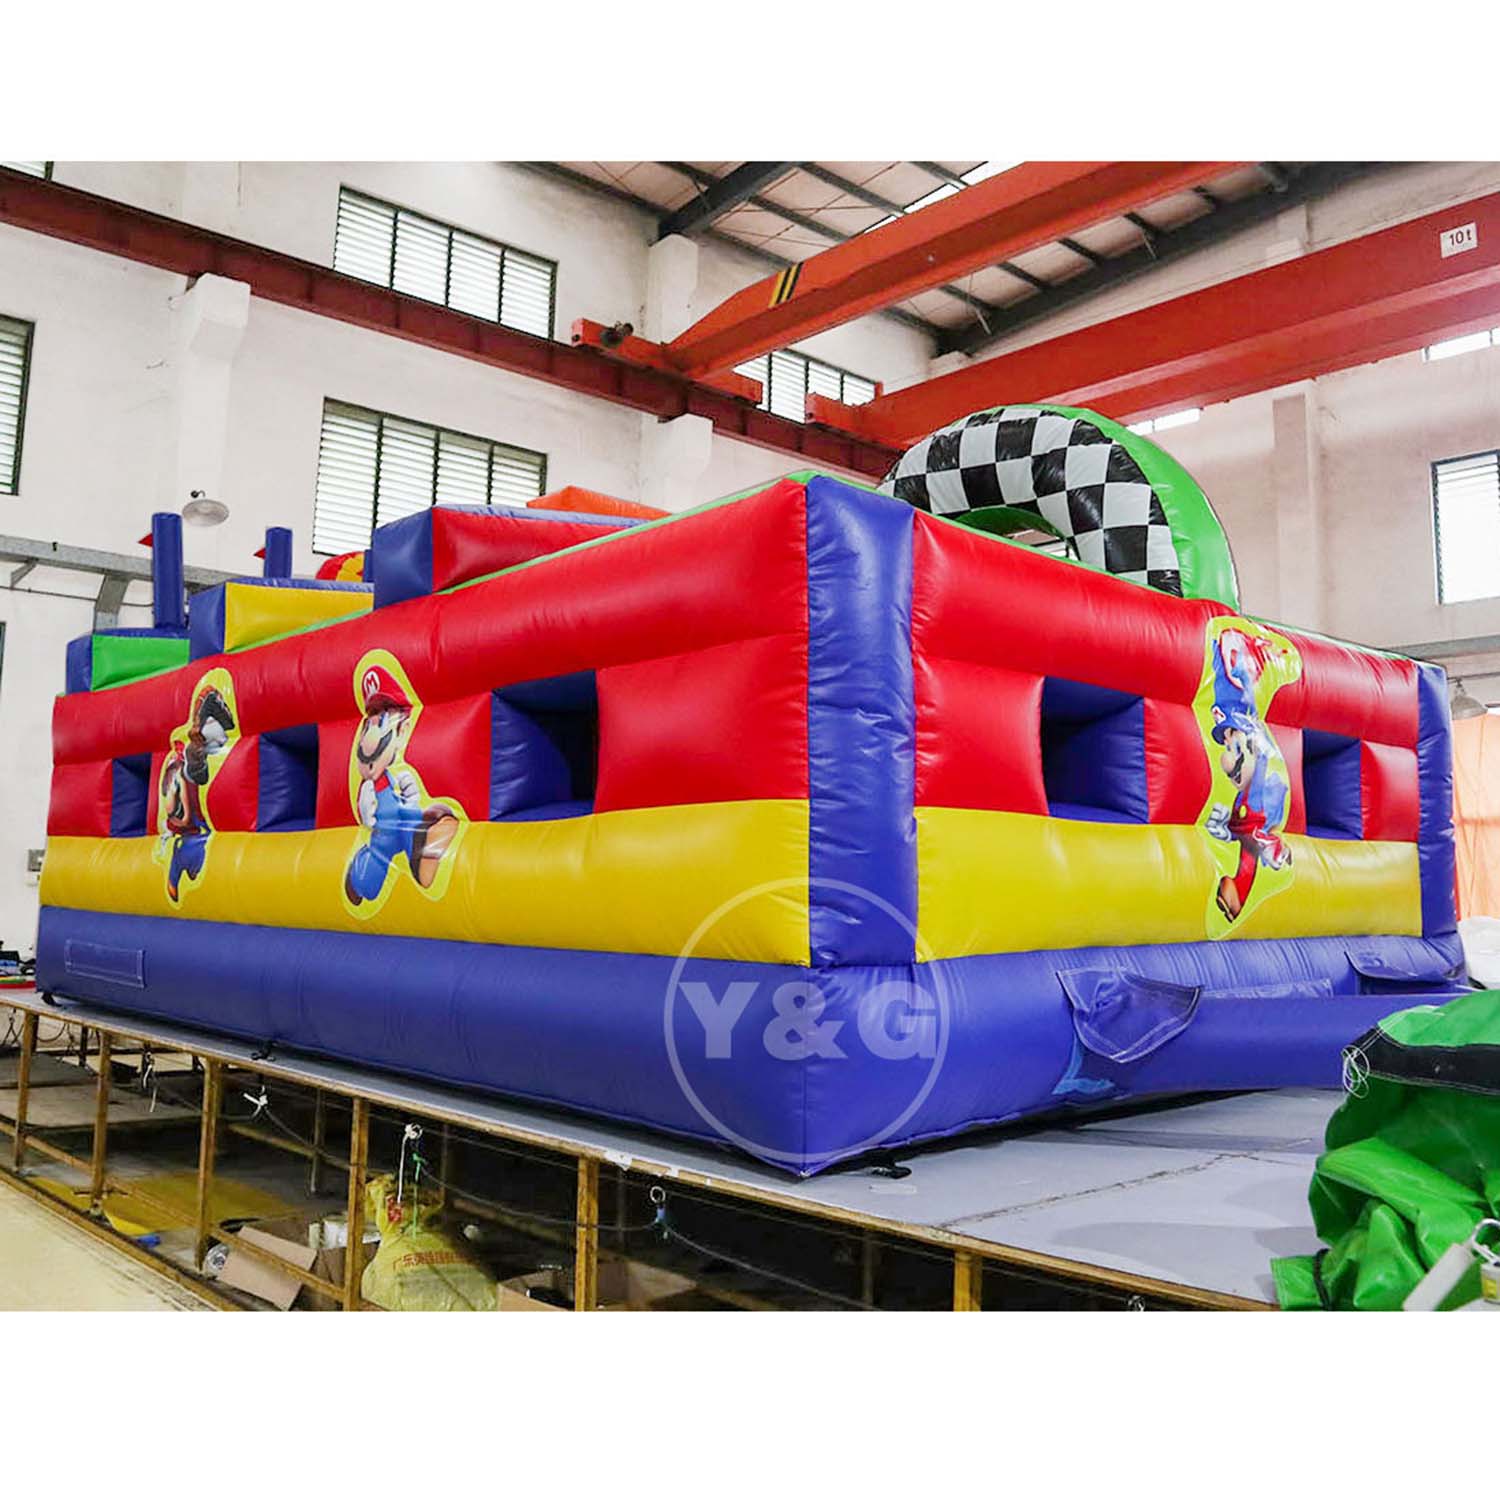 Mario Inflatable Obstacle CourseYGO-08